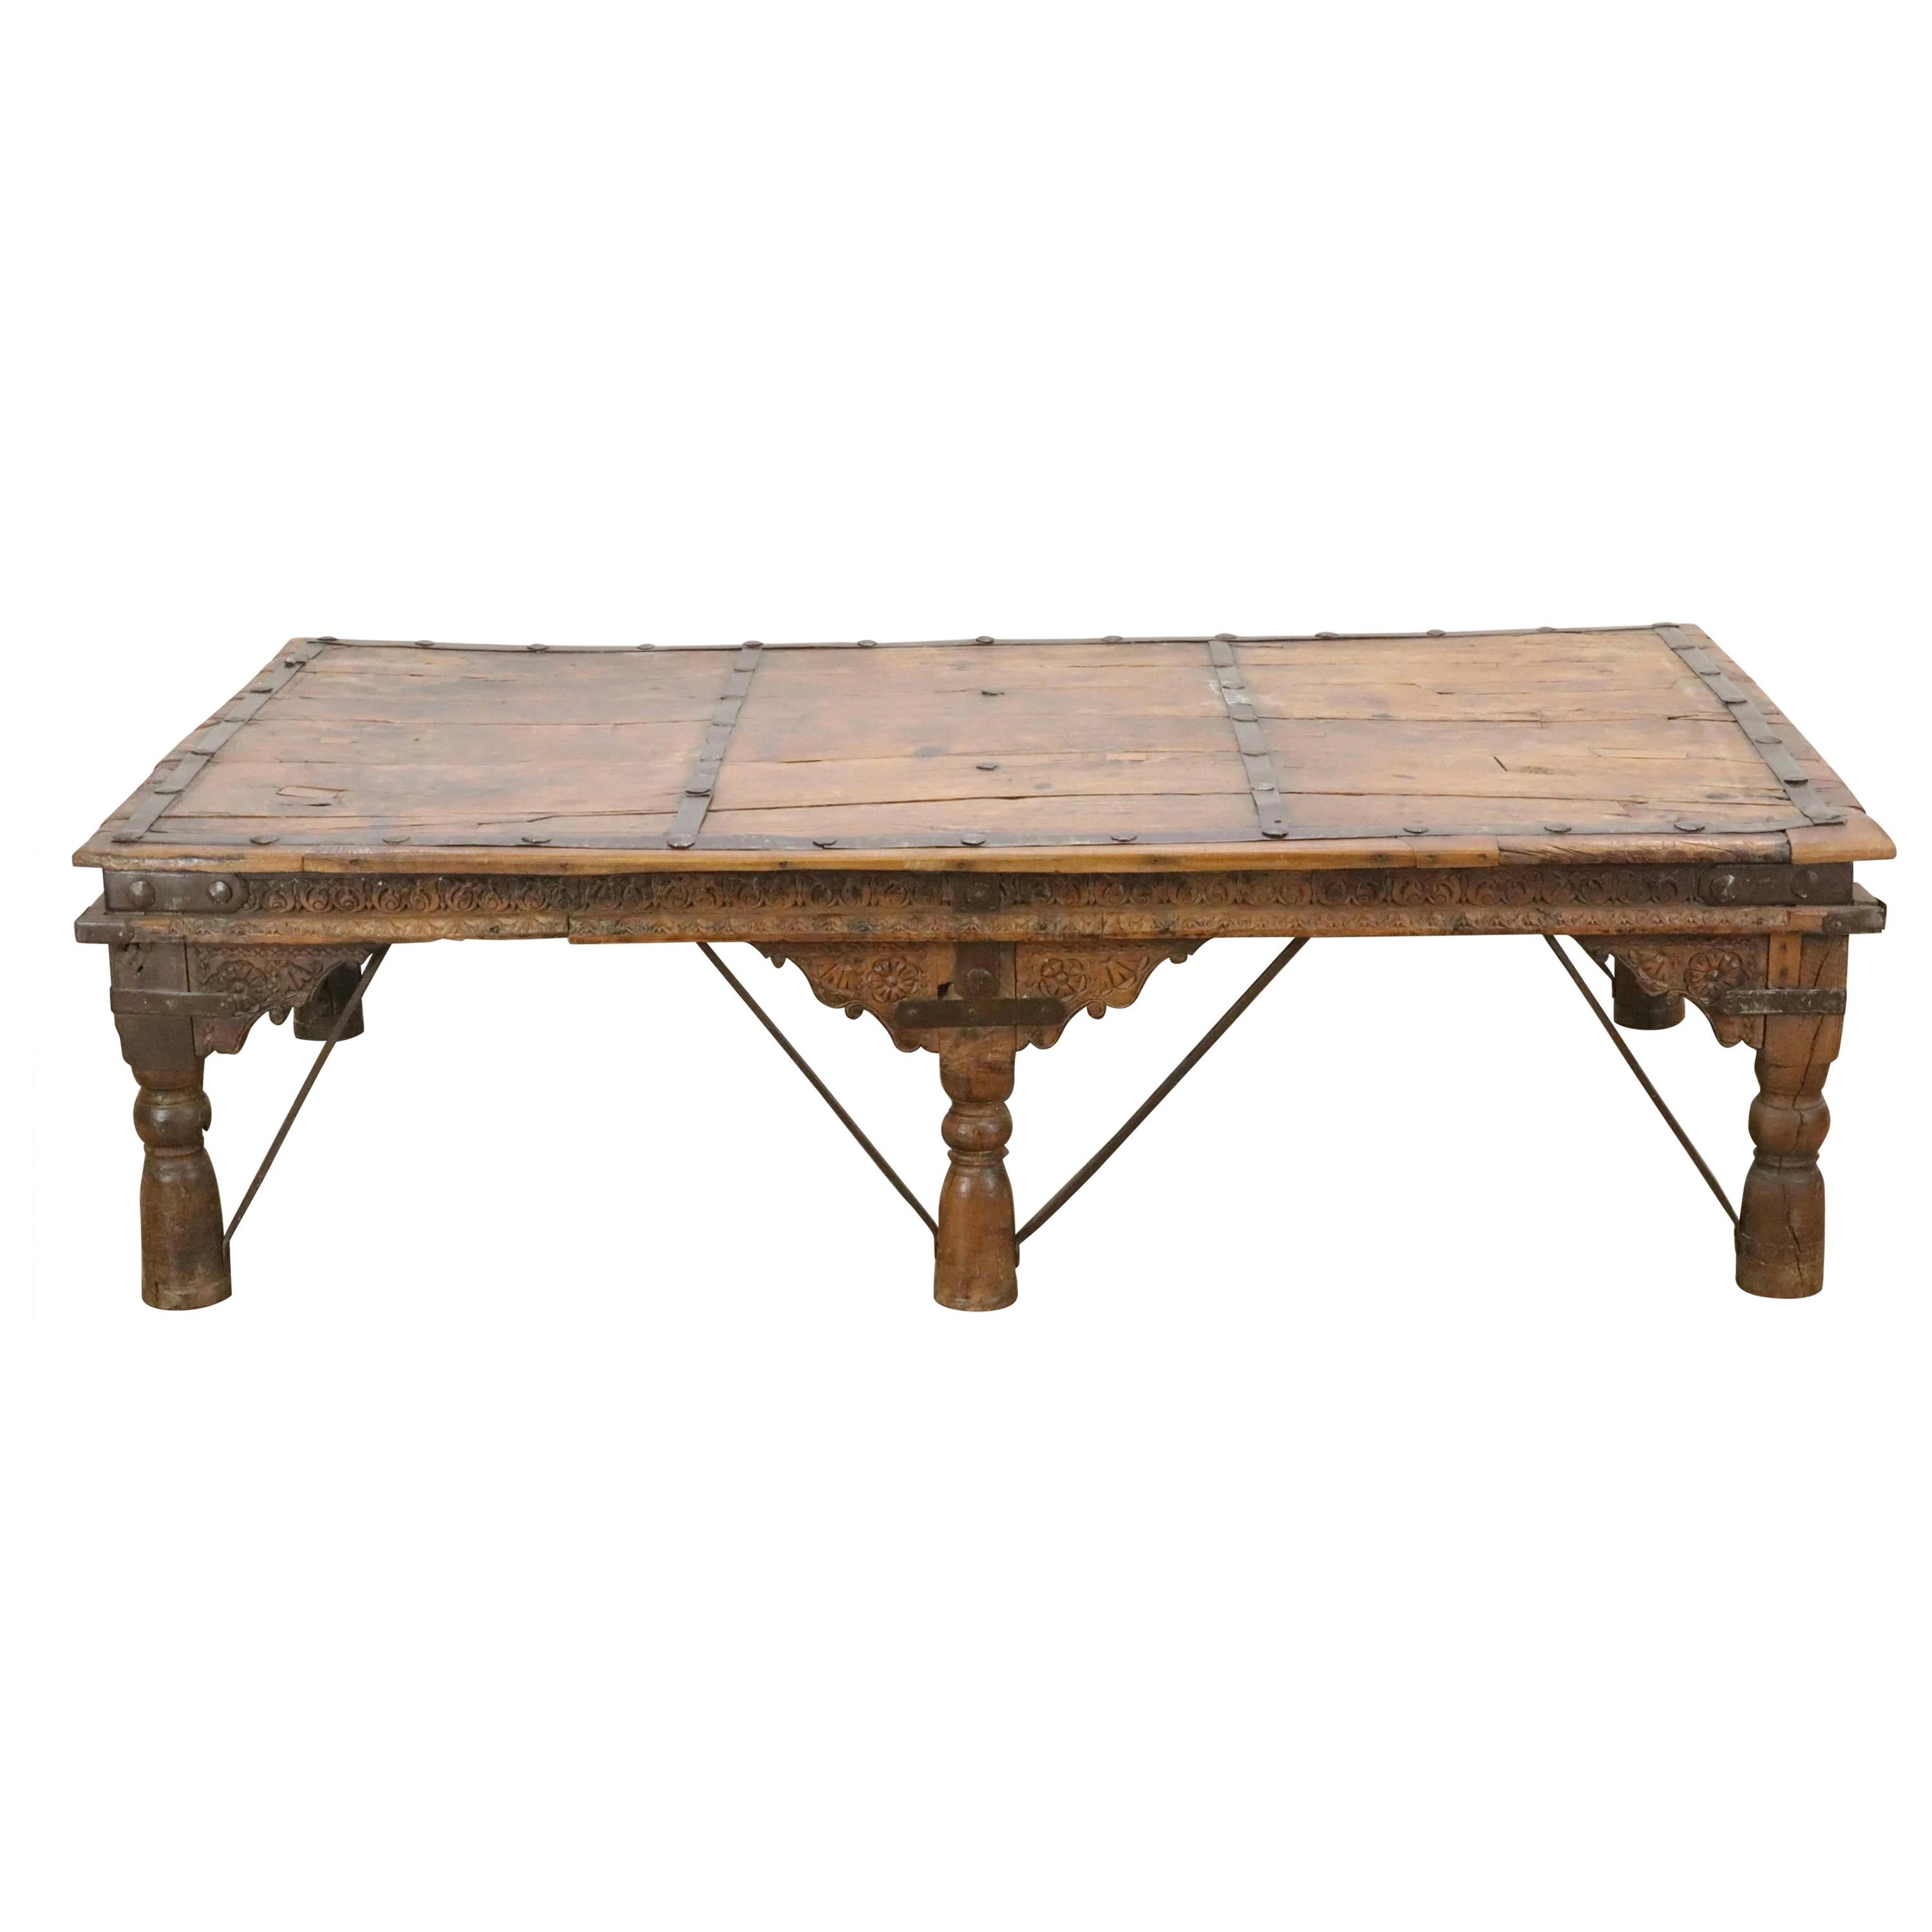 Large 19C Rustic Indian Carved Wood Coffee Table